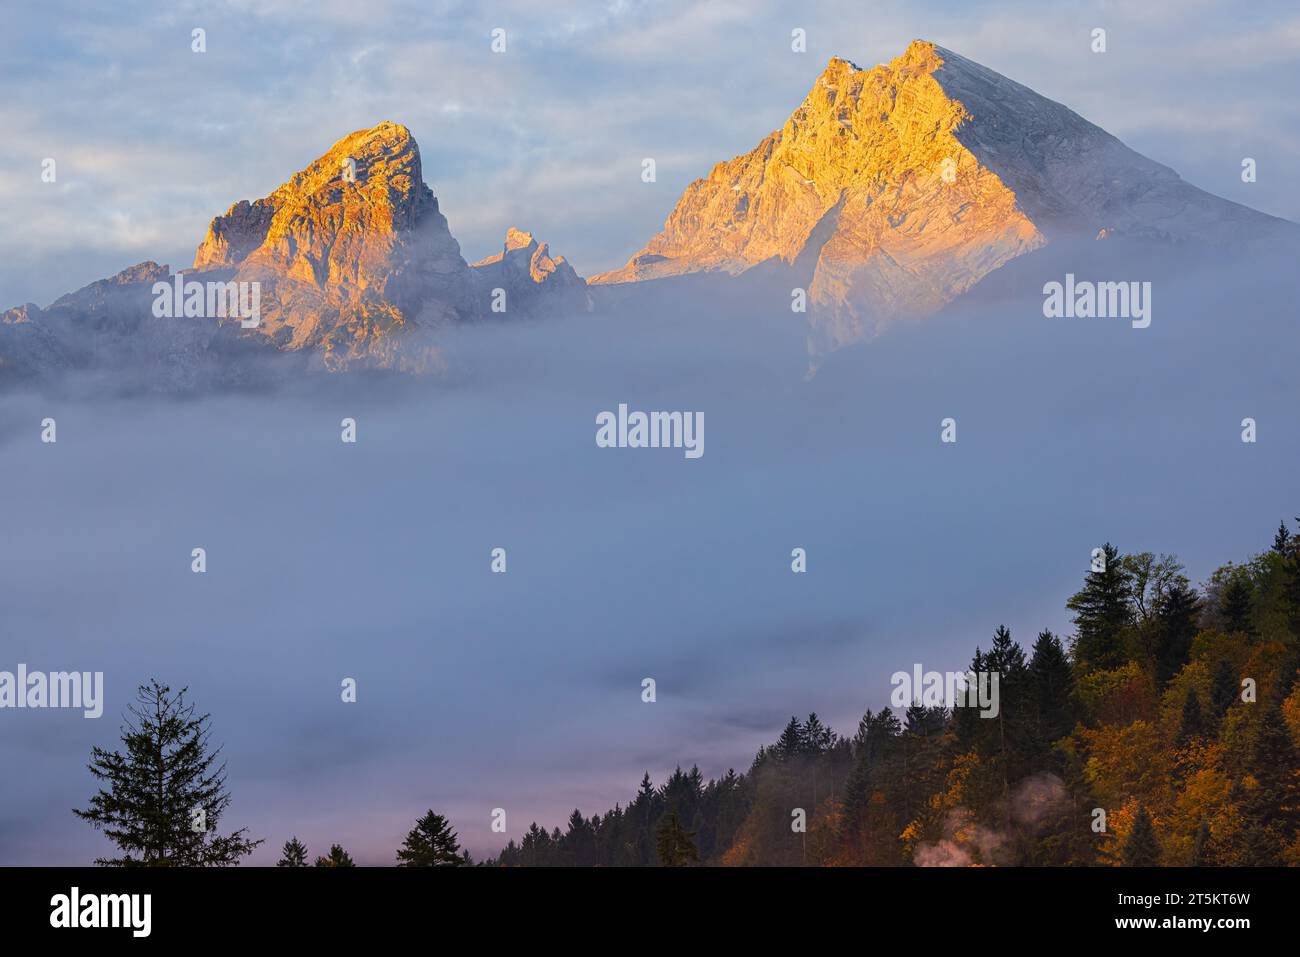 Watzmann mountain is sticking out above the clouds at an autumn sunrise near Berchtesgaden in Berchtesgadener land in Bavaria, southeastern Germany. Stock Photo